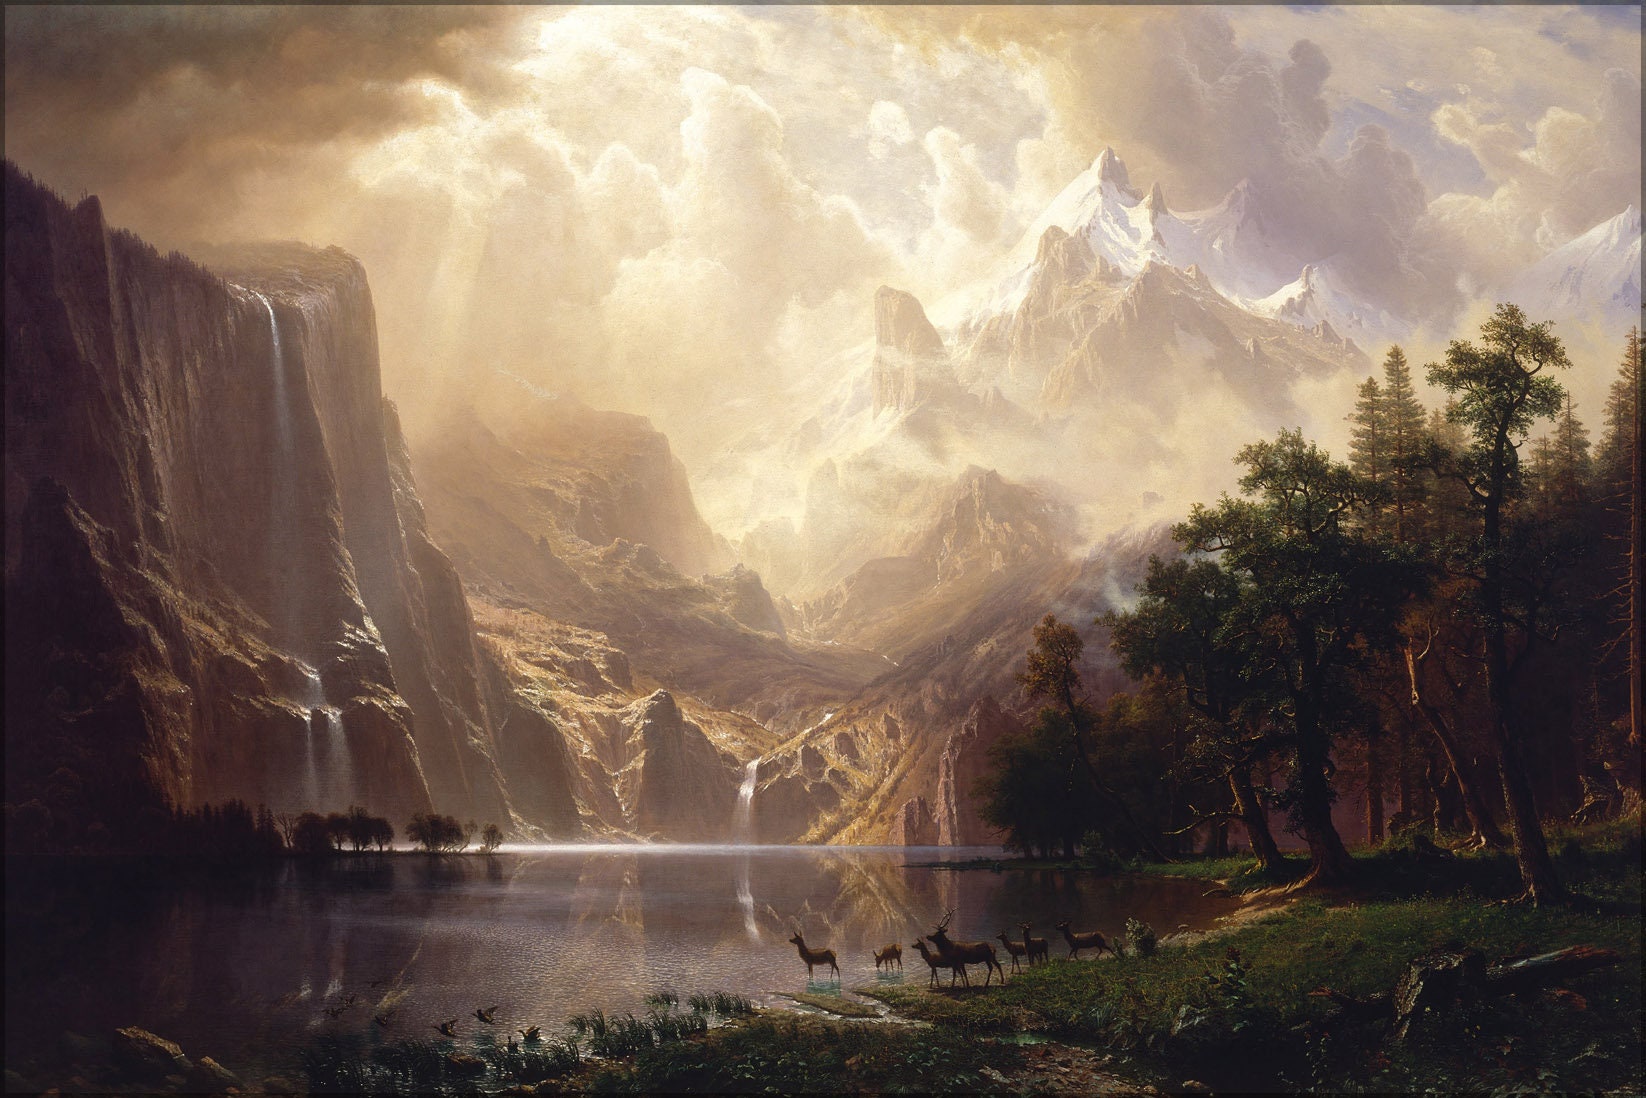 Poster, Many Sizes Available; Among the Sierra Nevada, California by Albert Bierstadt 1868